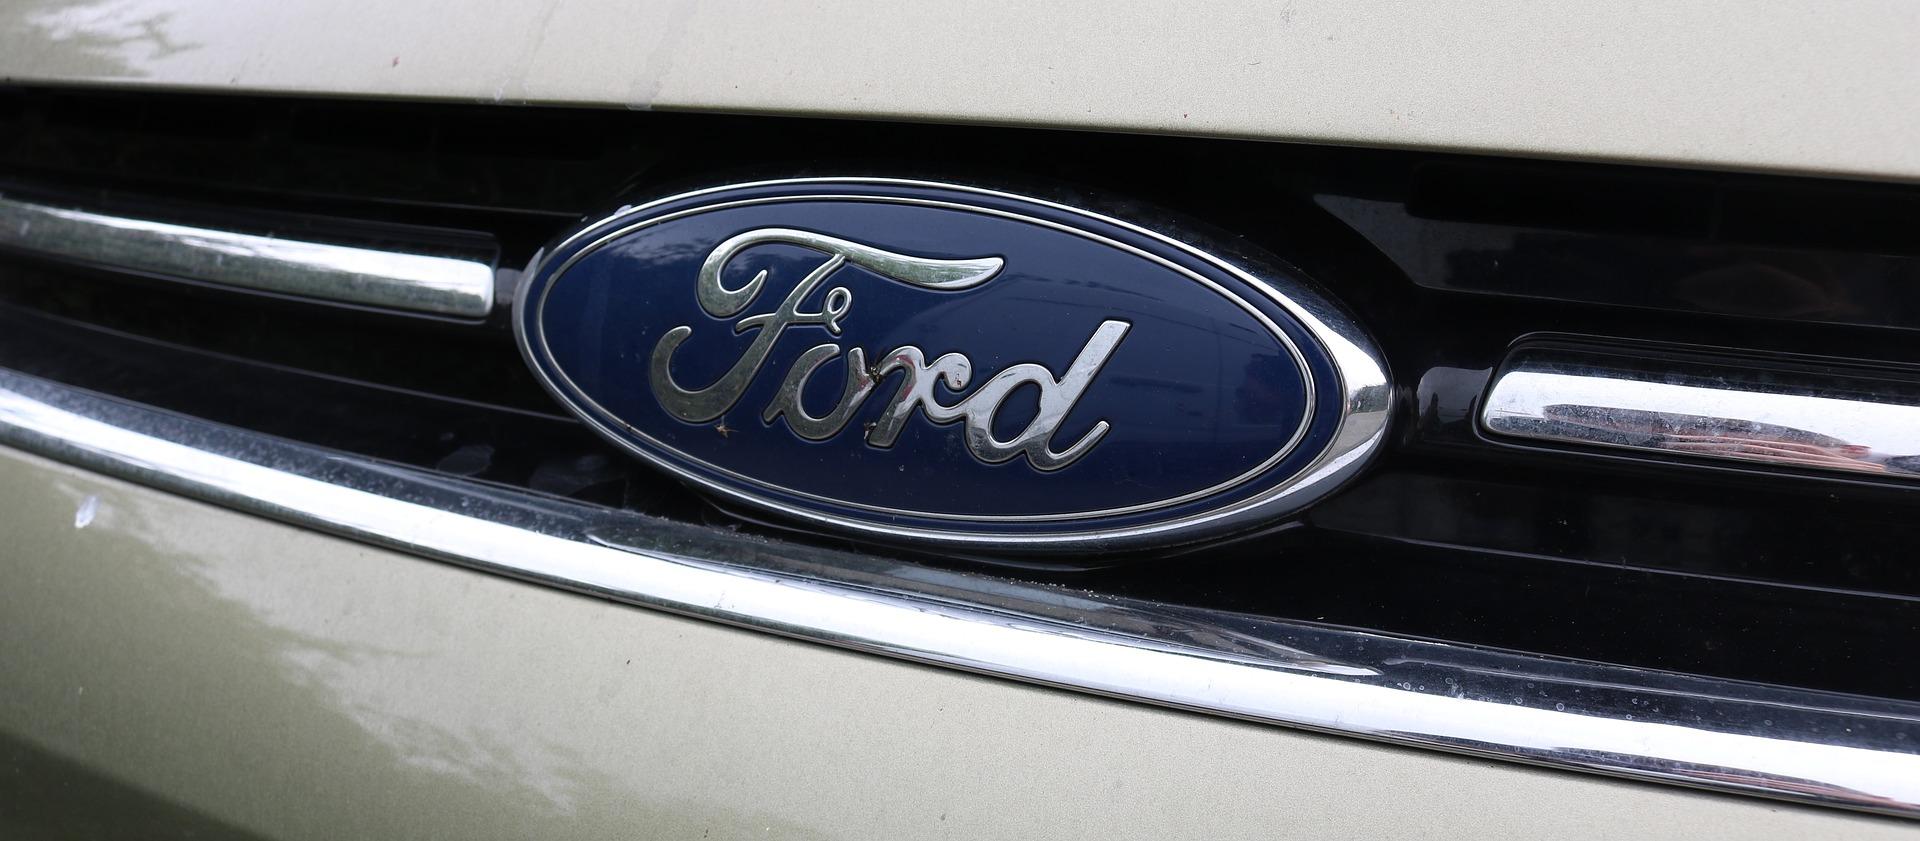 Closeup of Ford logo on the front of a car.